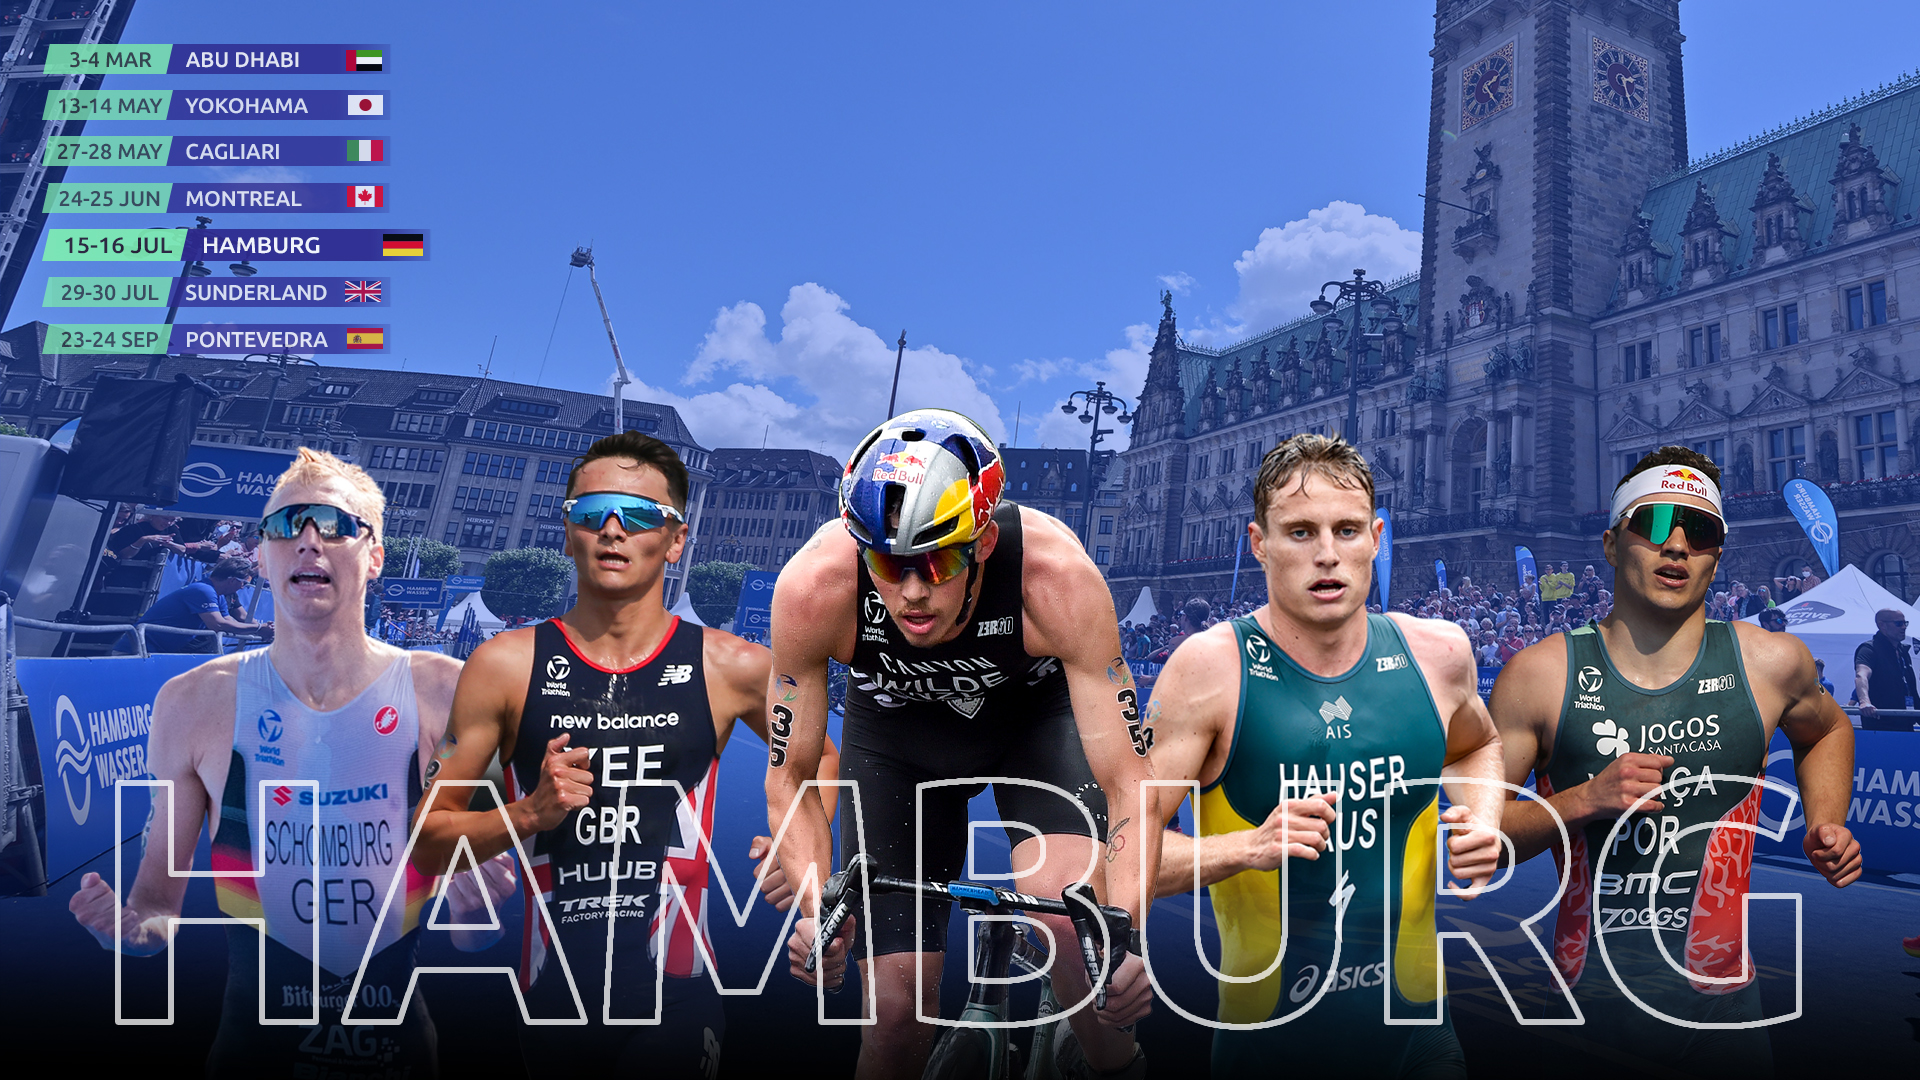 The race is on to become first Super-Sprint World Champion at WTCS Hamburg • World Triathlon